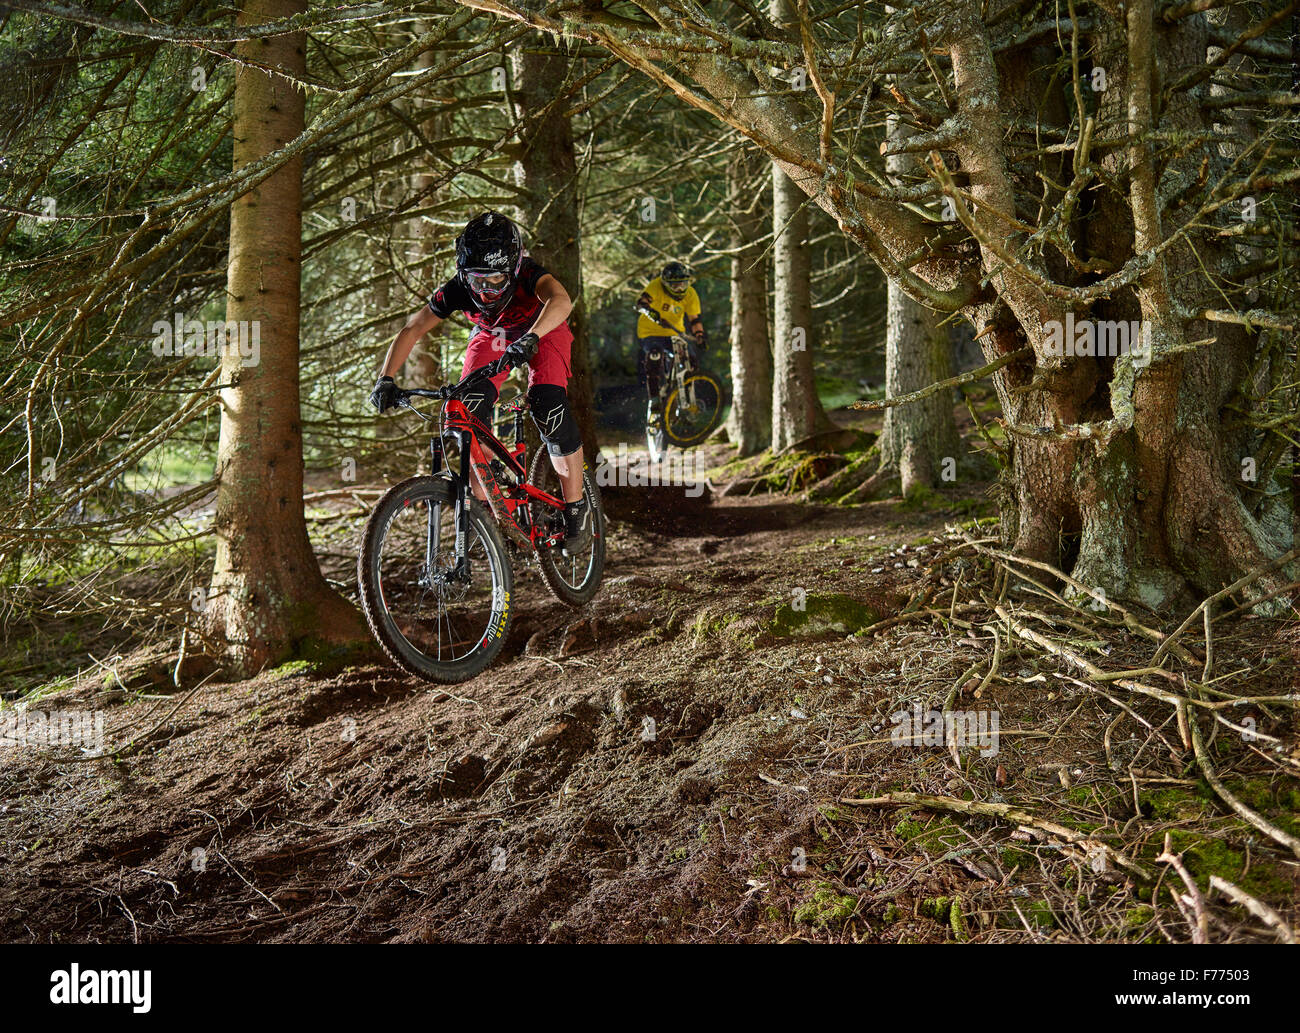 Mountain bikers, downhill bikers riding a downhill trail through the woods, Mutterer Alm, Muttereralmpark, Mutters, Tyrol Stock Photo